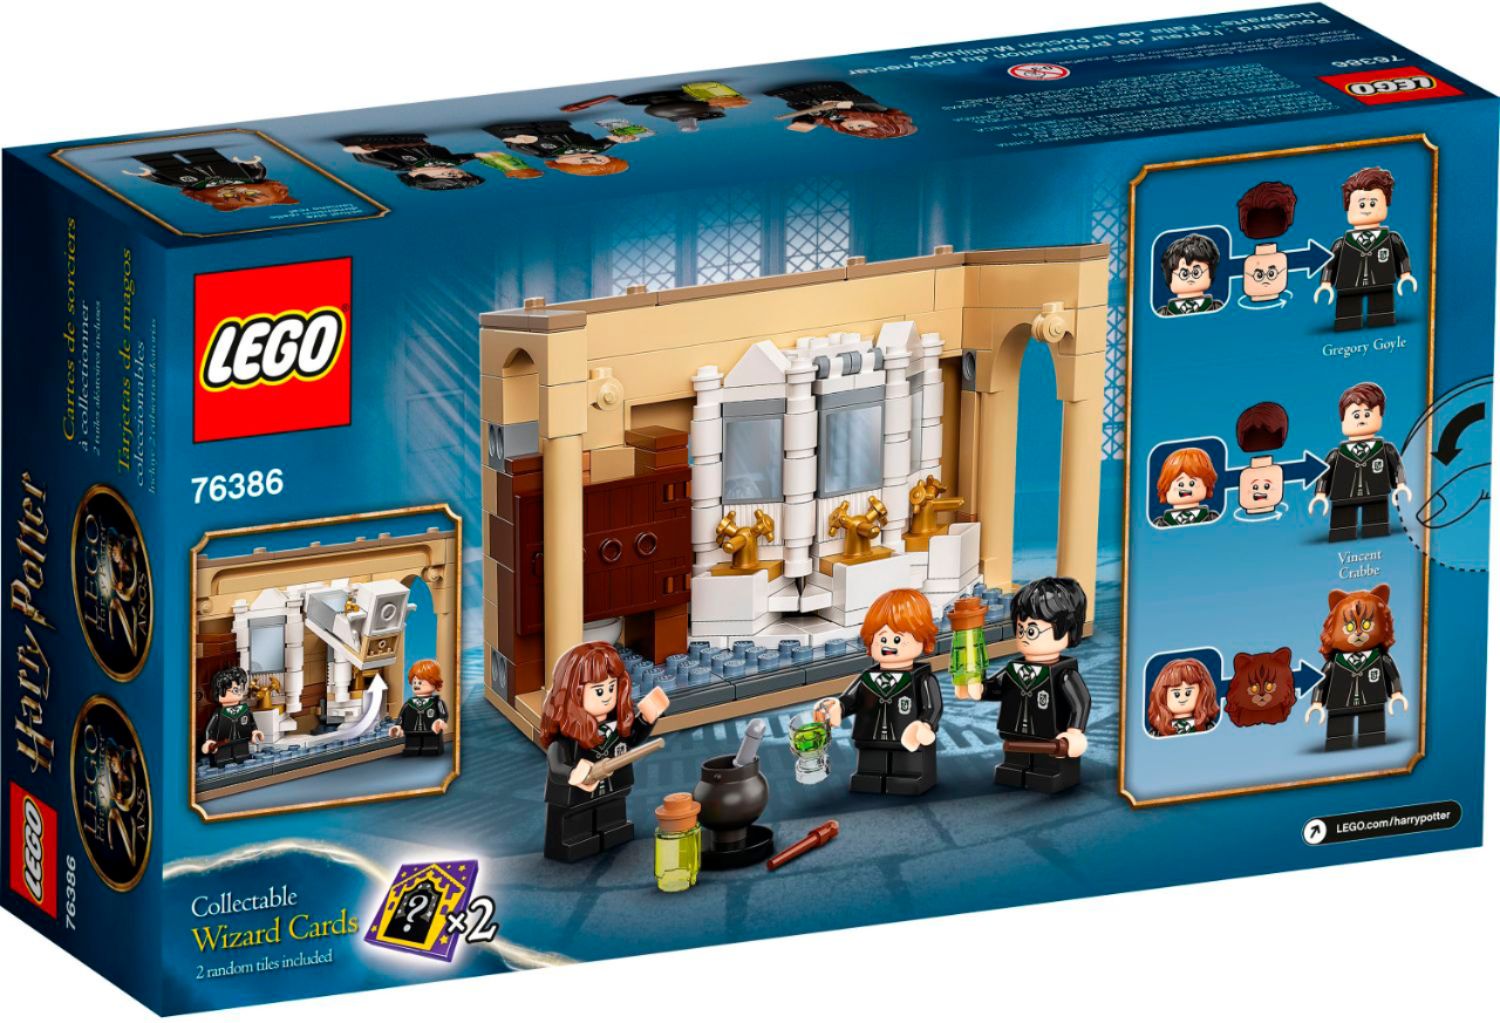 Lego Harry Potter Collection (Switch) Review 